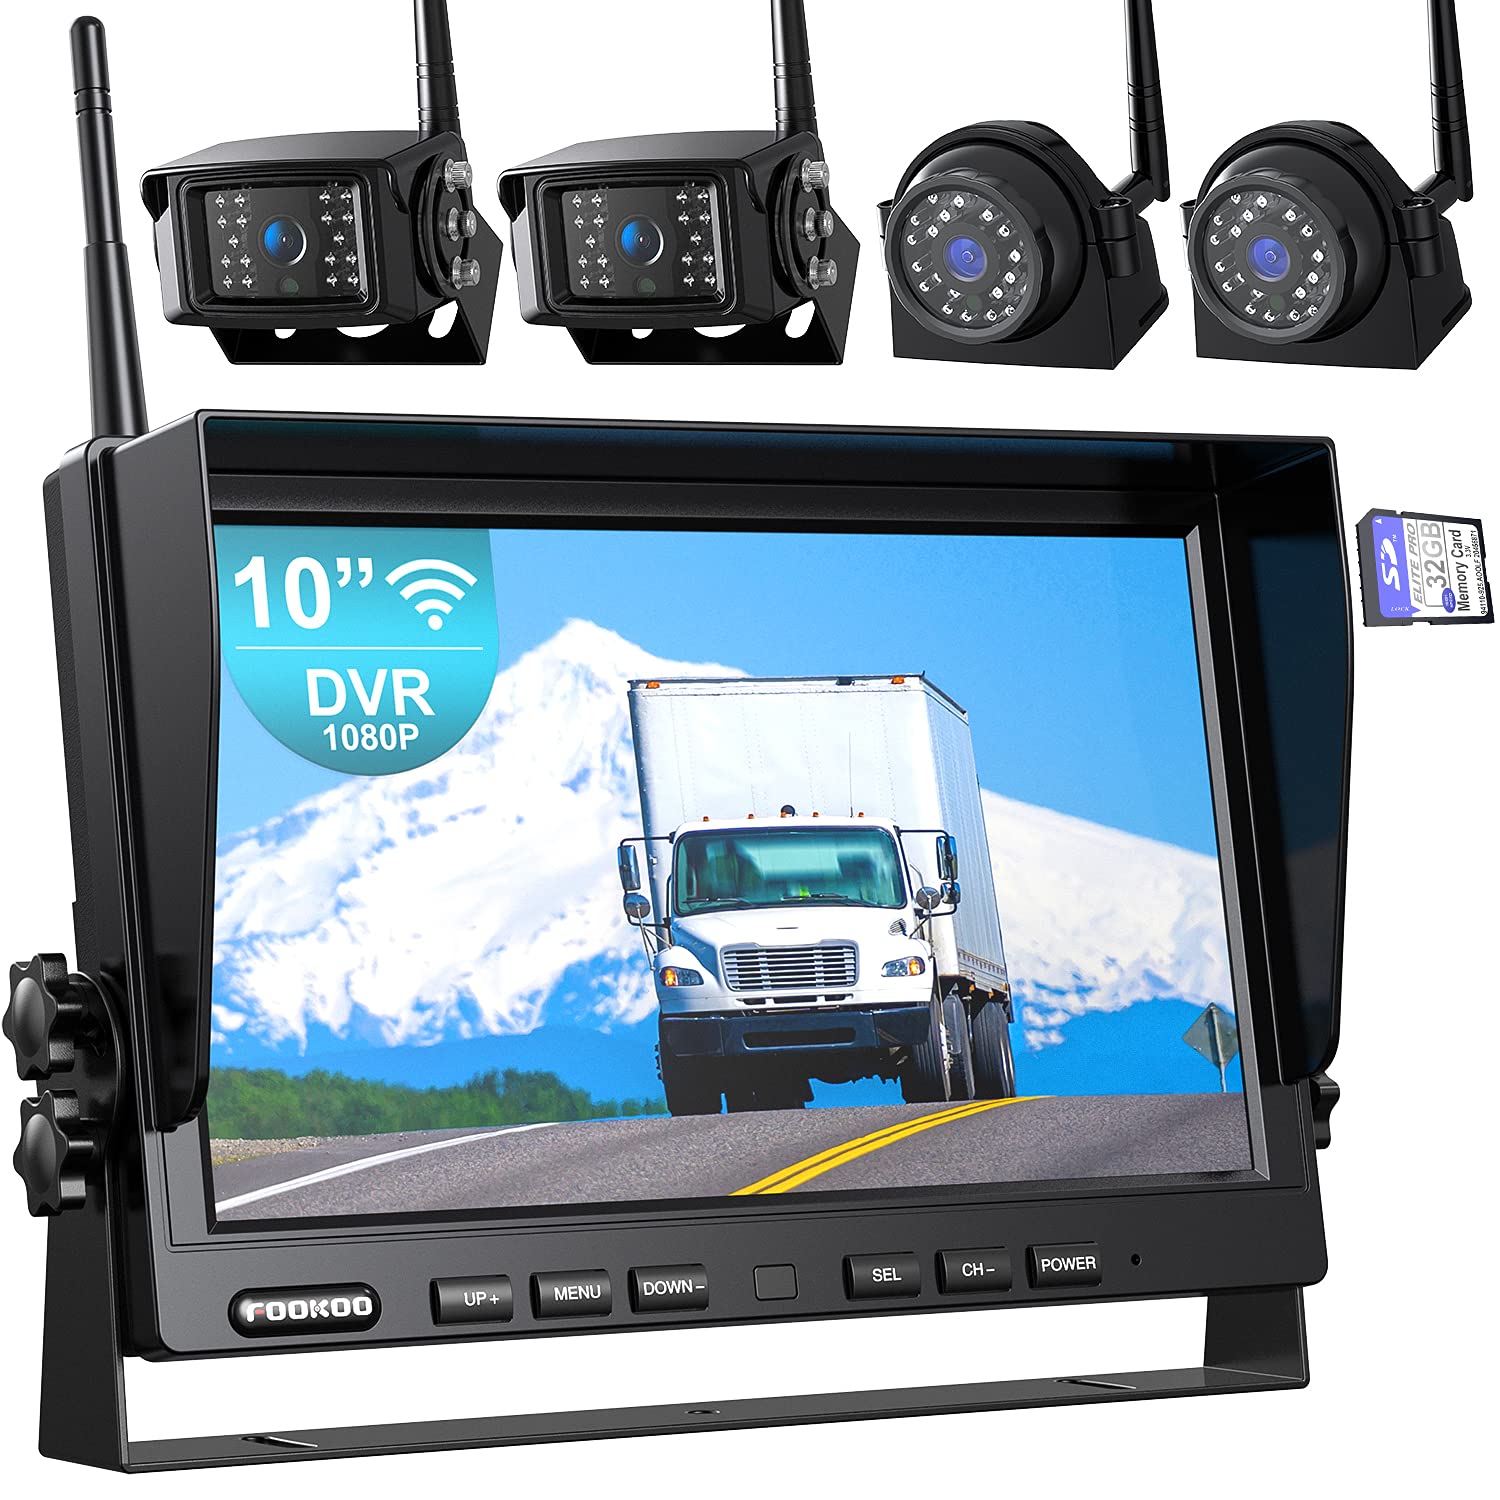 Fookoo HD 10" Wireless Backup Camera System, 1080P 10-inch Quad Split Monitor w/Recording, Waterproof Side & Rear View Cameras, 4 Channel, Digital Signal, Parking Lines for RV/Truck/Trailer (DW104)